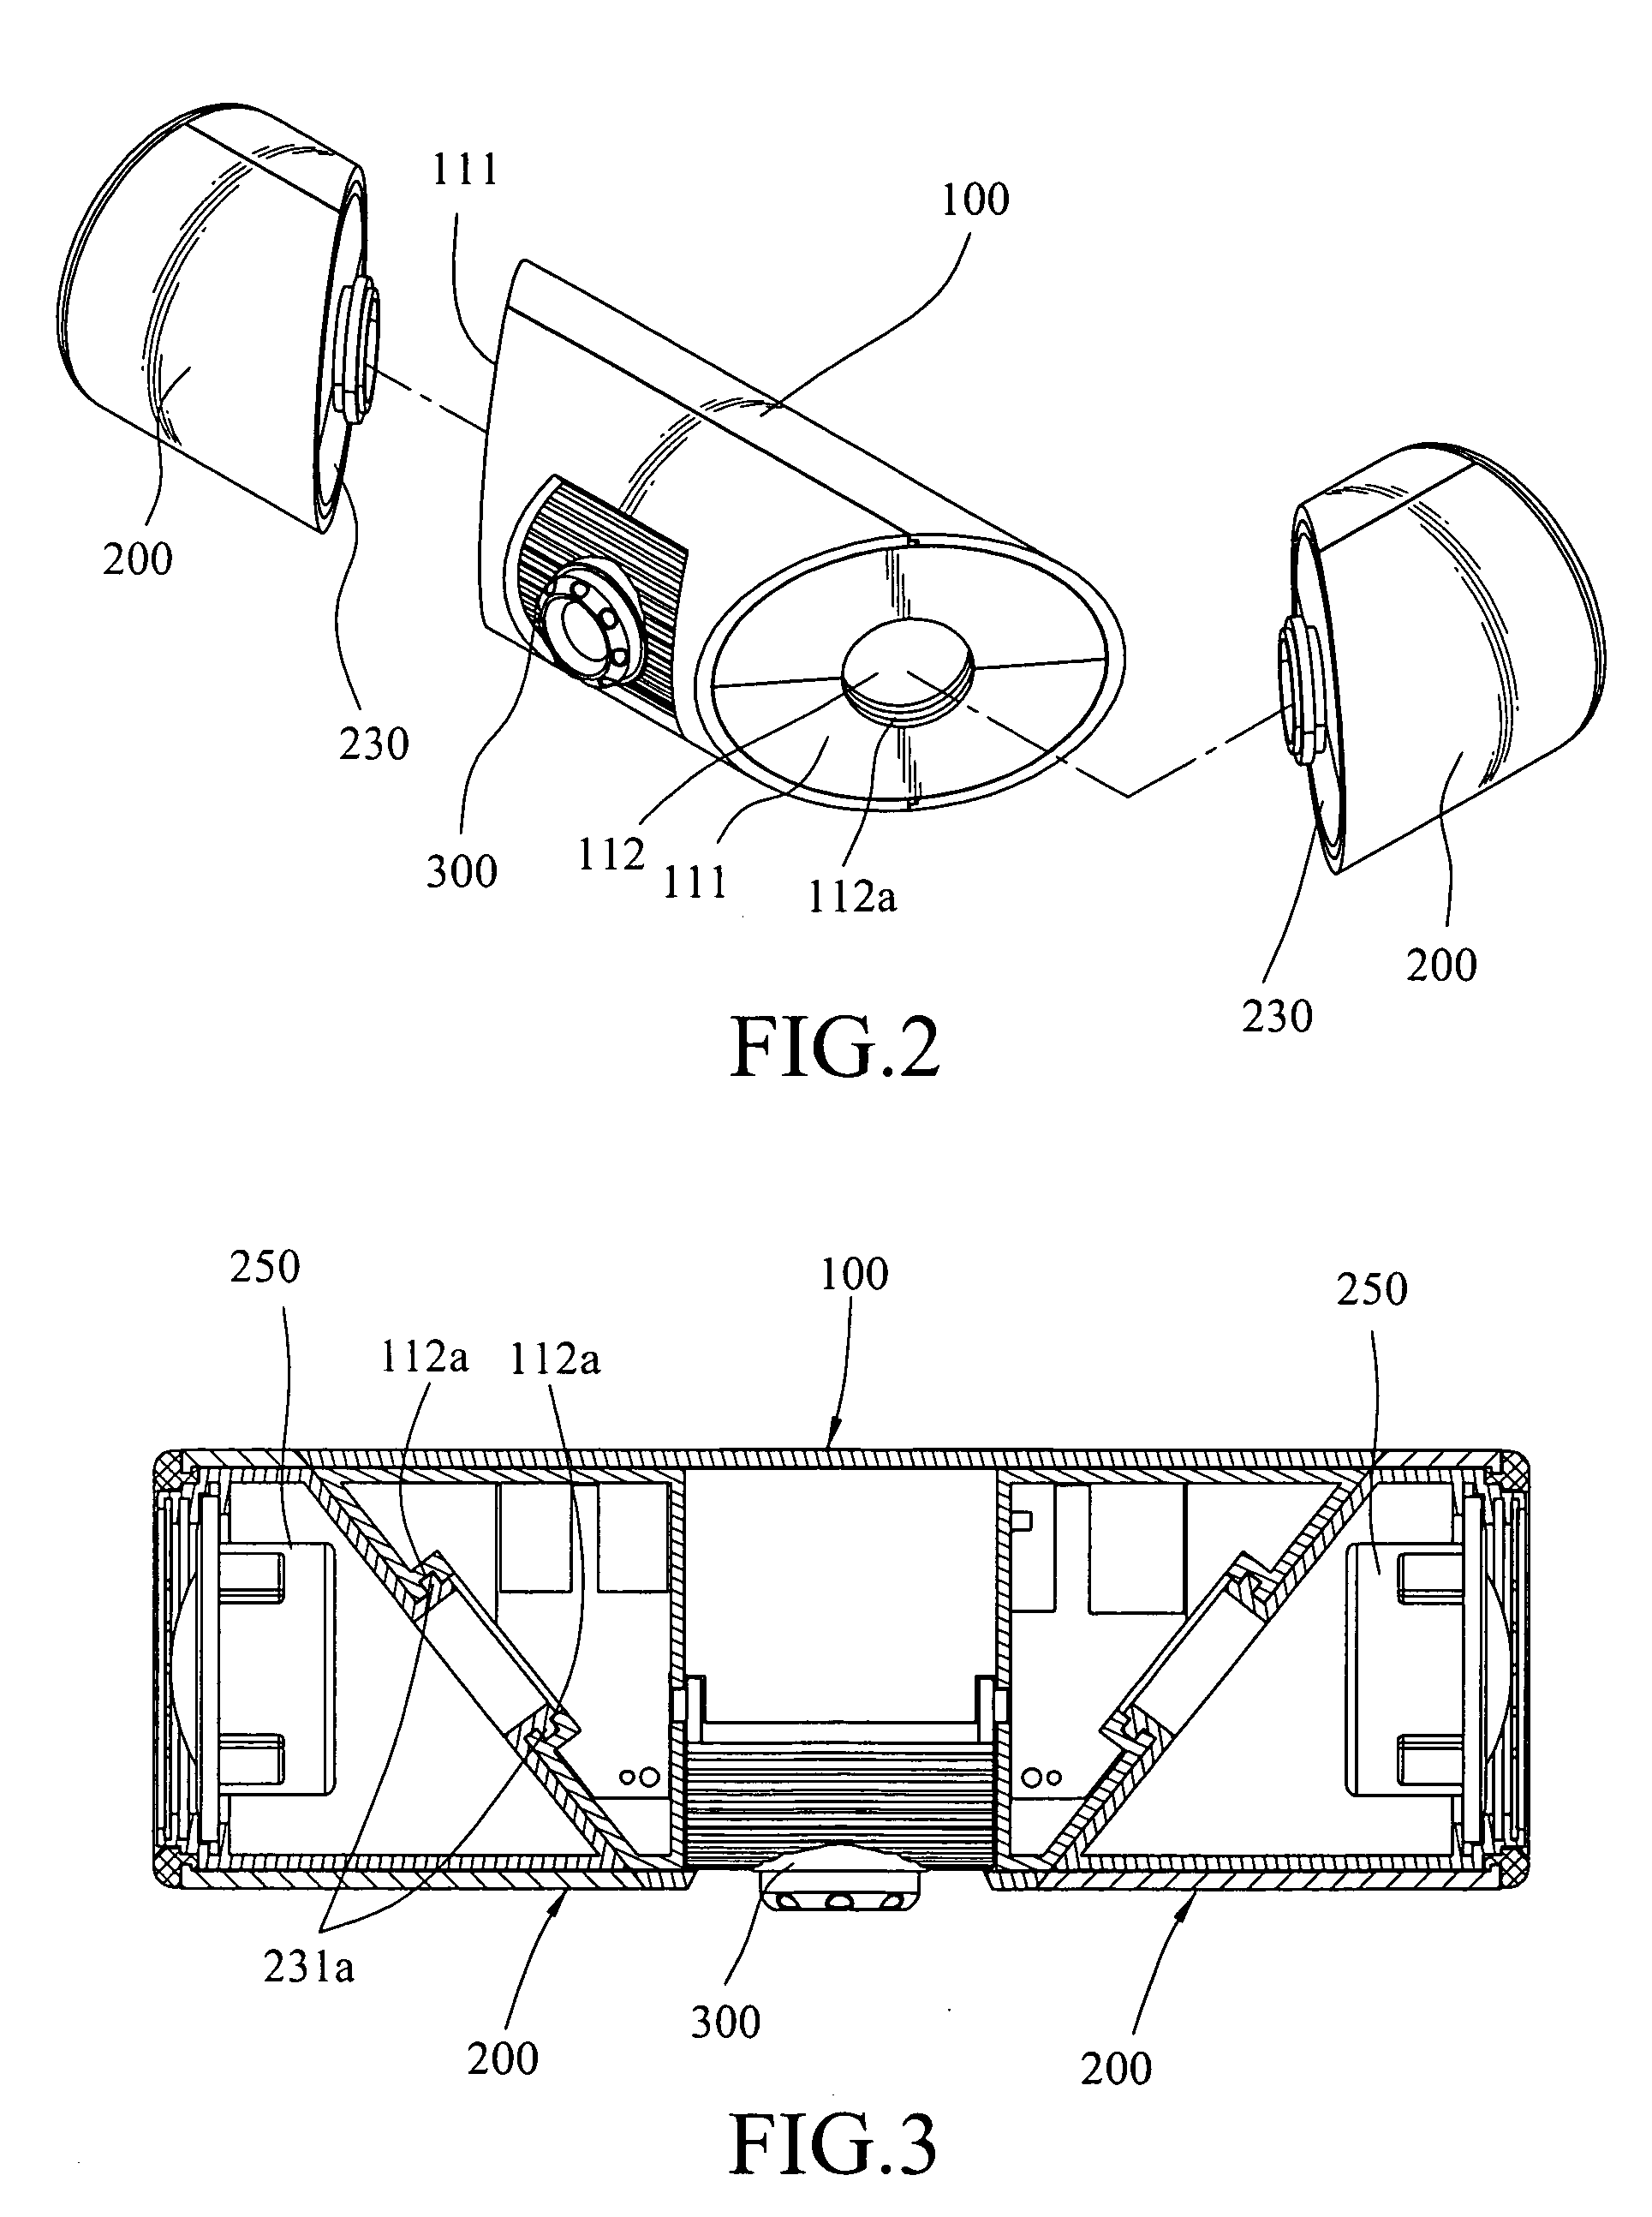 Multifunction camera assembly for a computer